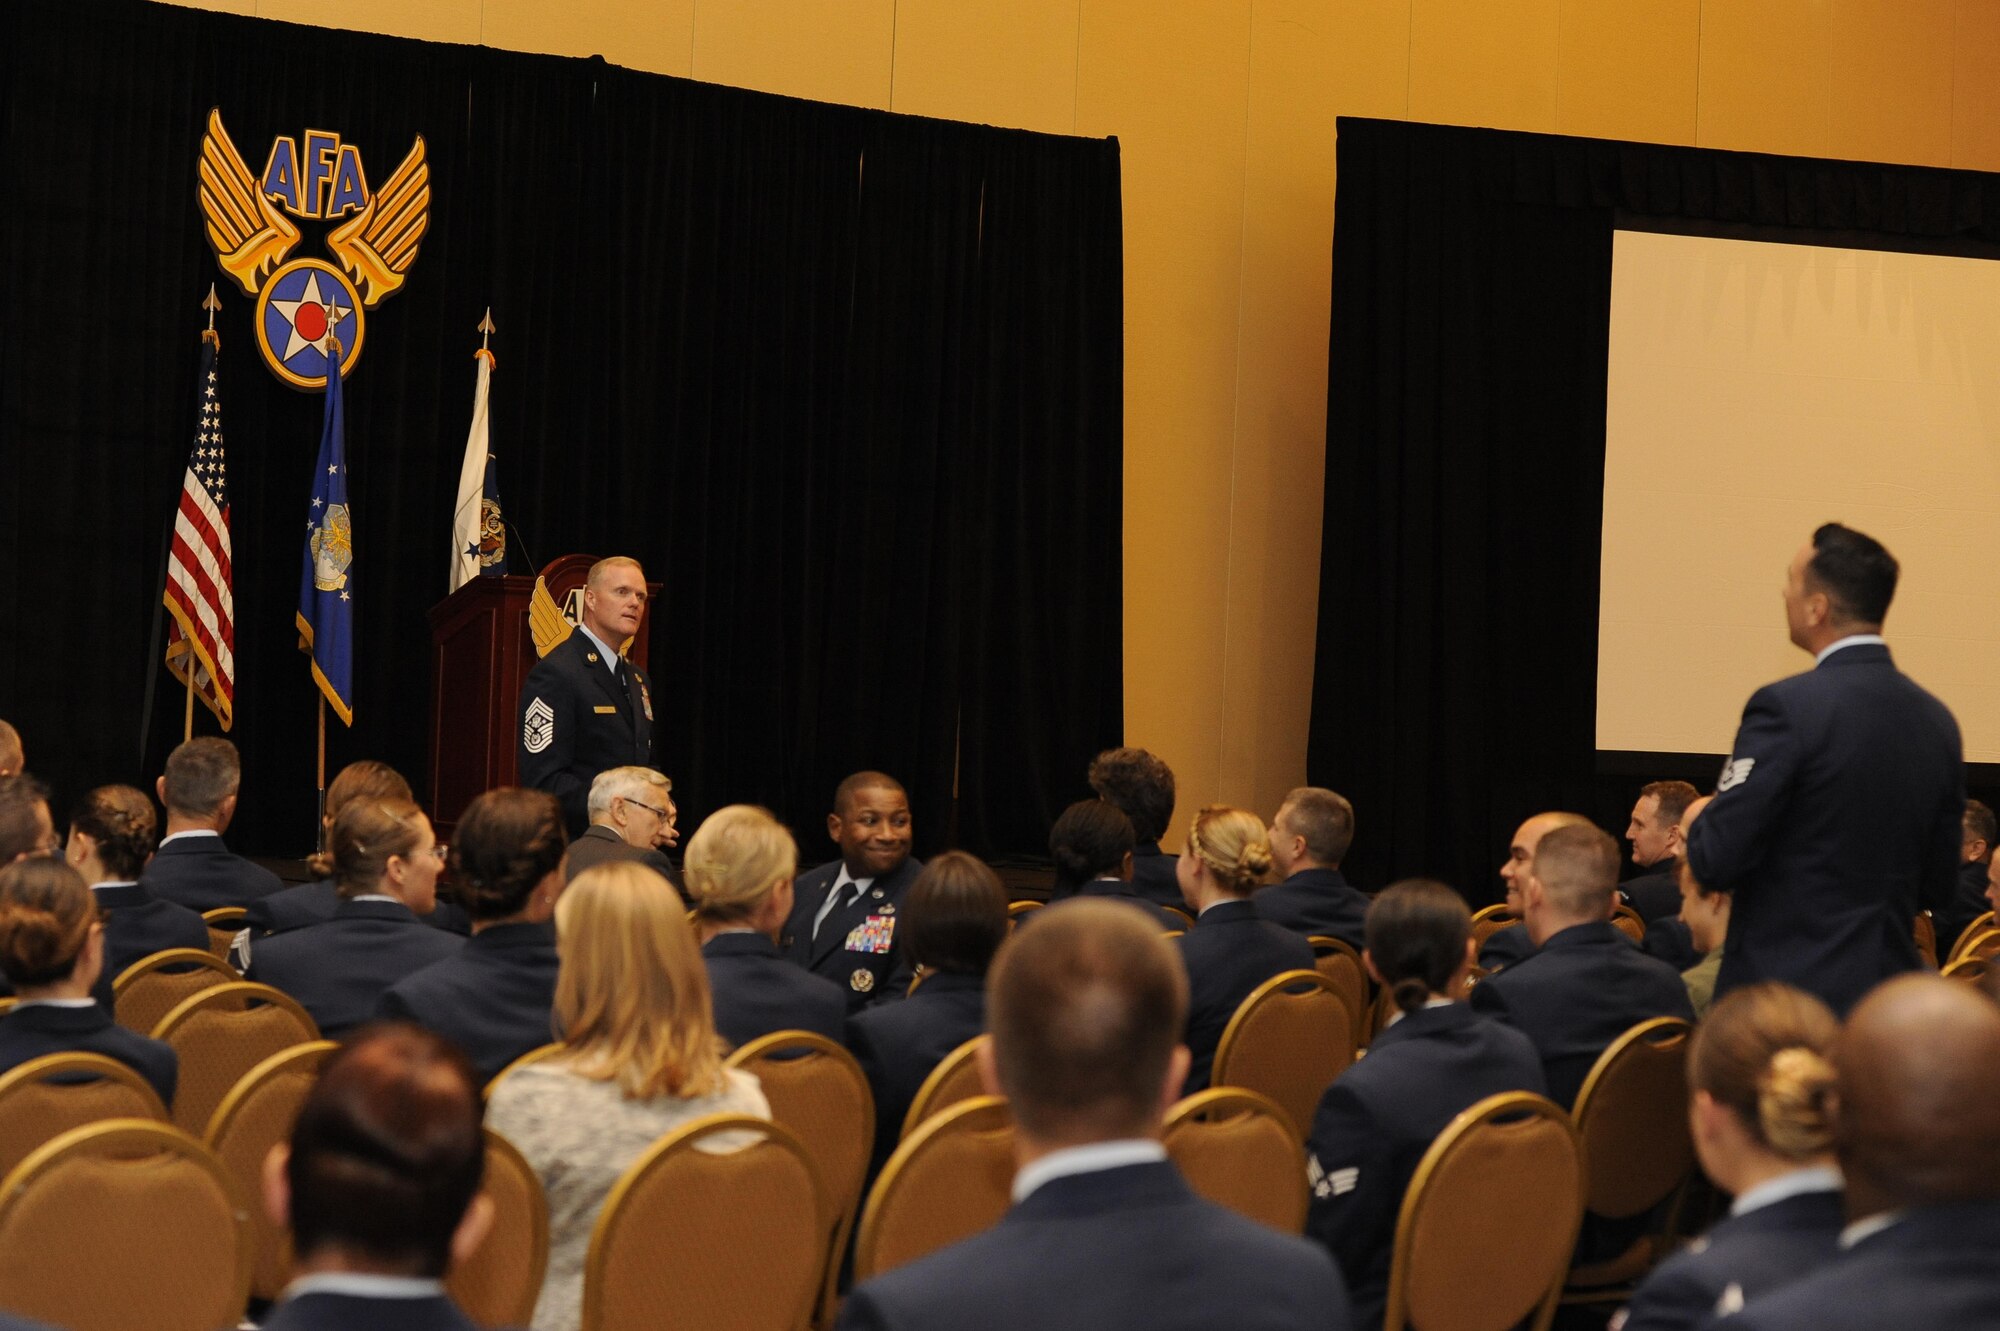 Staff Sgt Jireh Aki, a installation antiterrorism officer at Joint Base Andrews, Md., asks Chief Master Sgt. of the Air Force James A. Cody a question during the Air Force Association Air and Space Conference and Technology Exposition in Washington, D.C., Sept. 16, 2015. Cody said each Air Force generation gets better with technology and education, but if they do not, then the leaders have failed them. (Air Force photo/Staff Sgt. Whitney Stanfield)